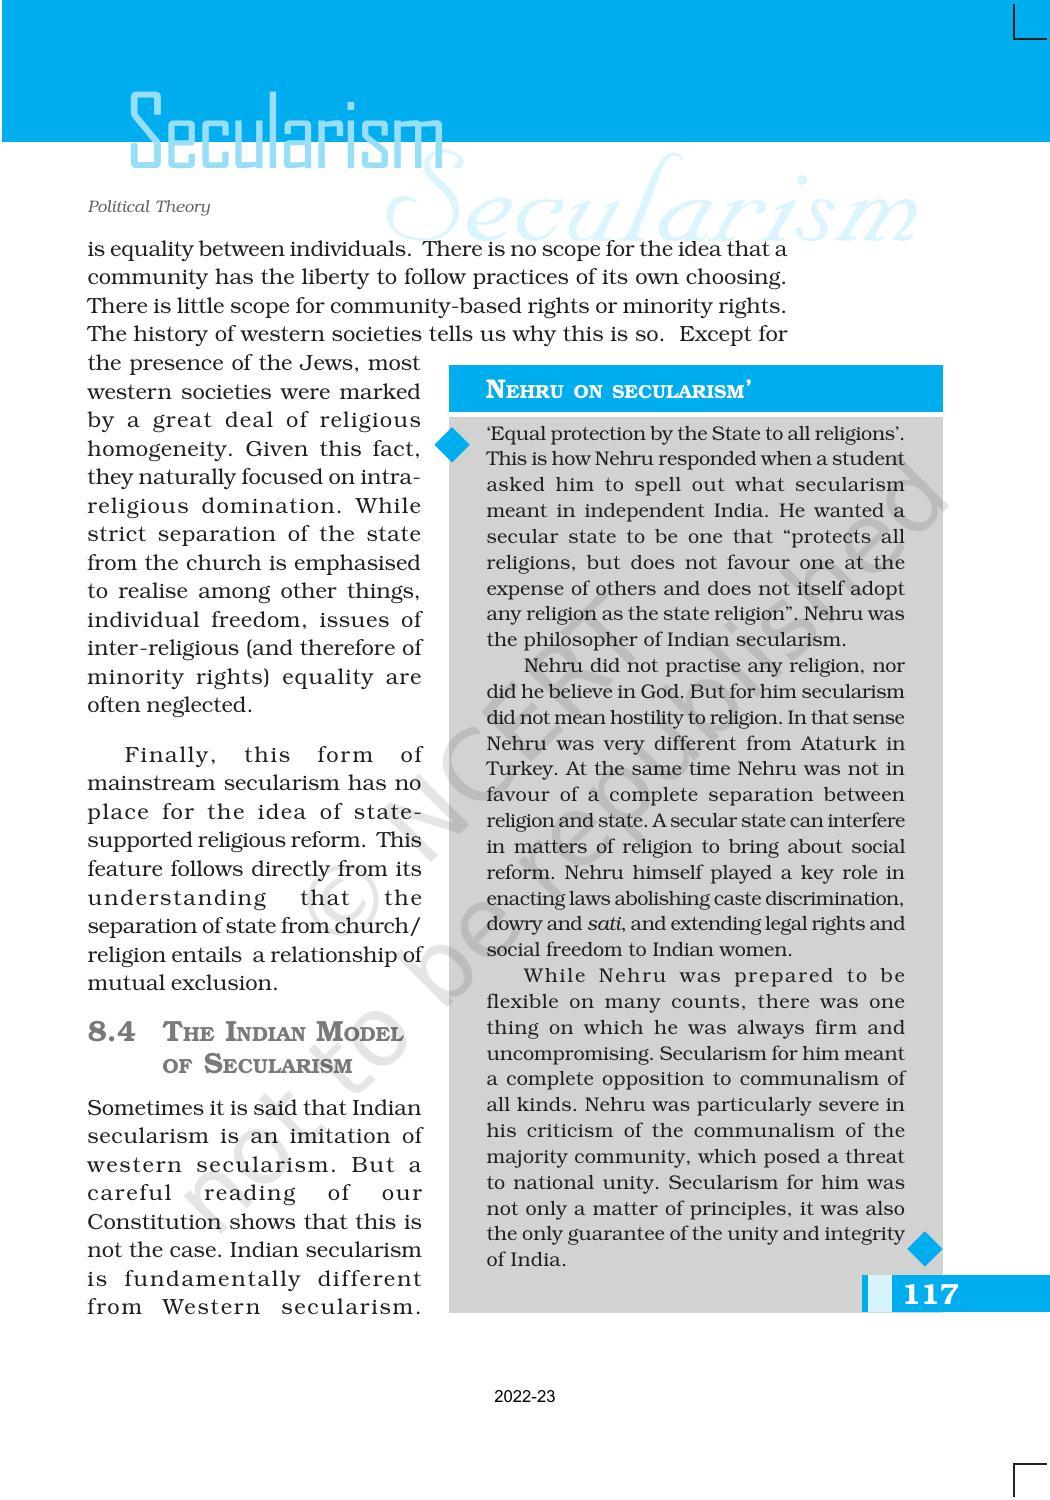 NCERT Book for Class 11 Political Science (Political Theory) Chapter 8 Secularism - Page 7